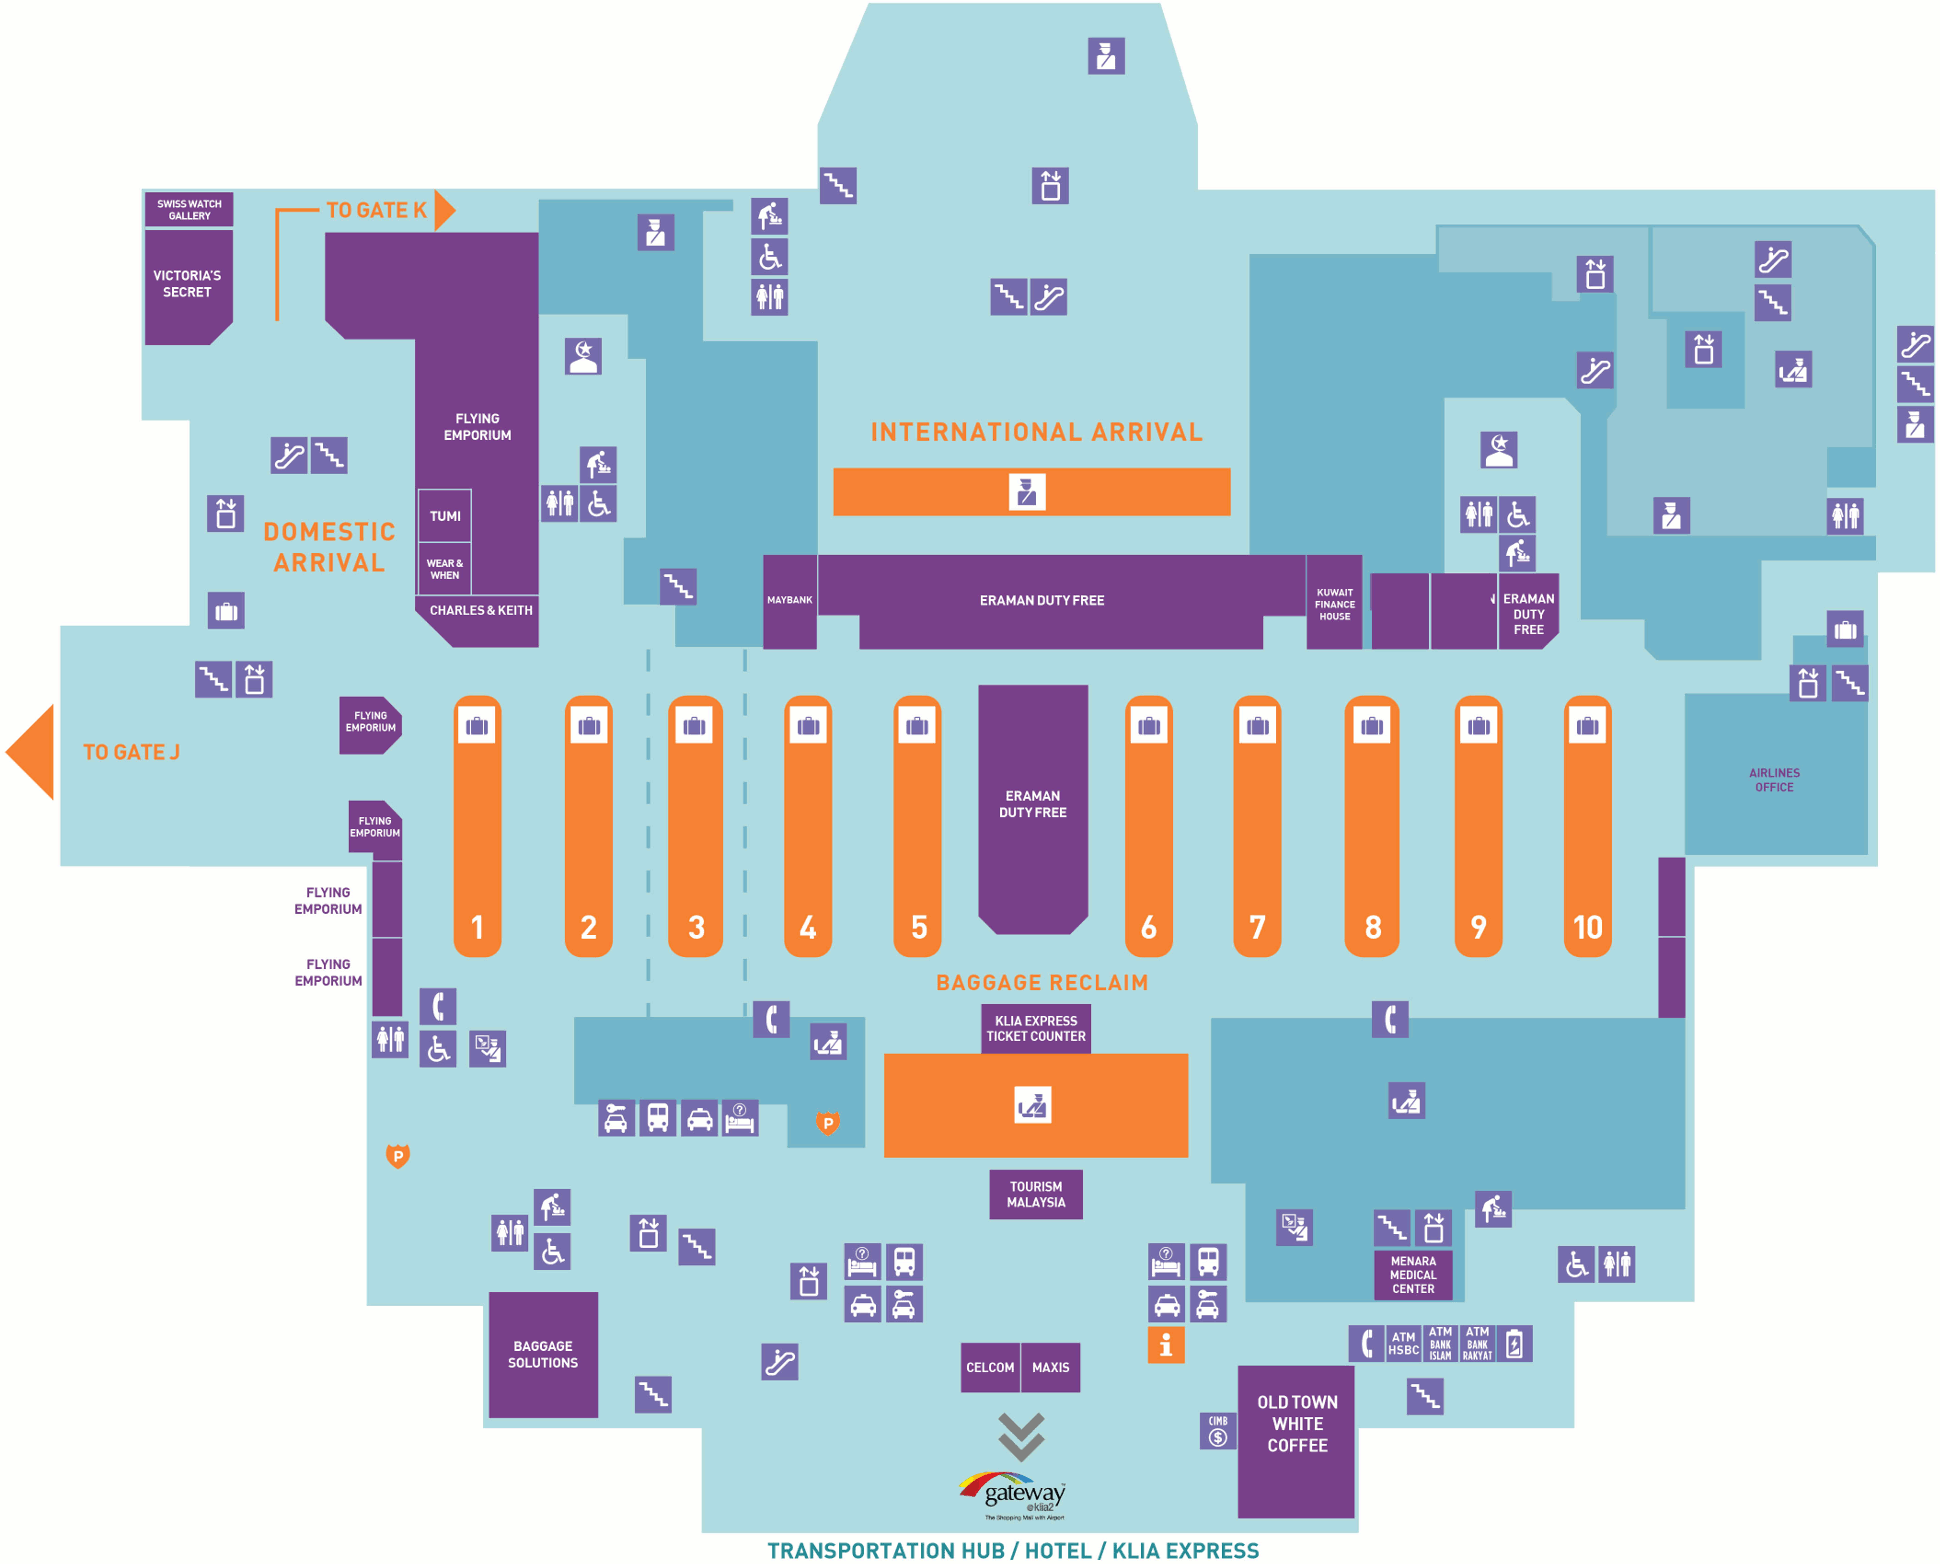 klia2 Layout Plan, useful guide to help you getting around